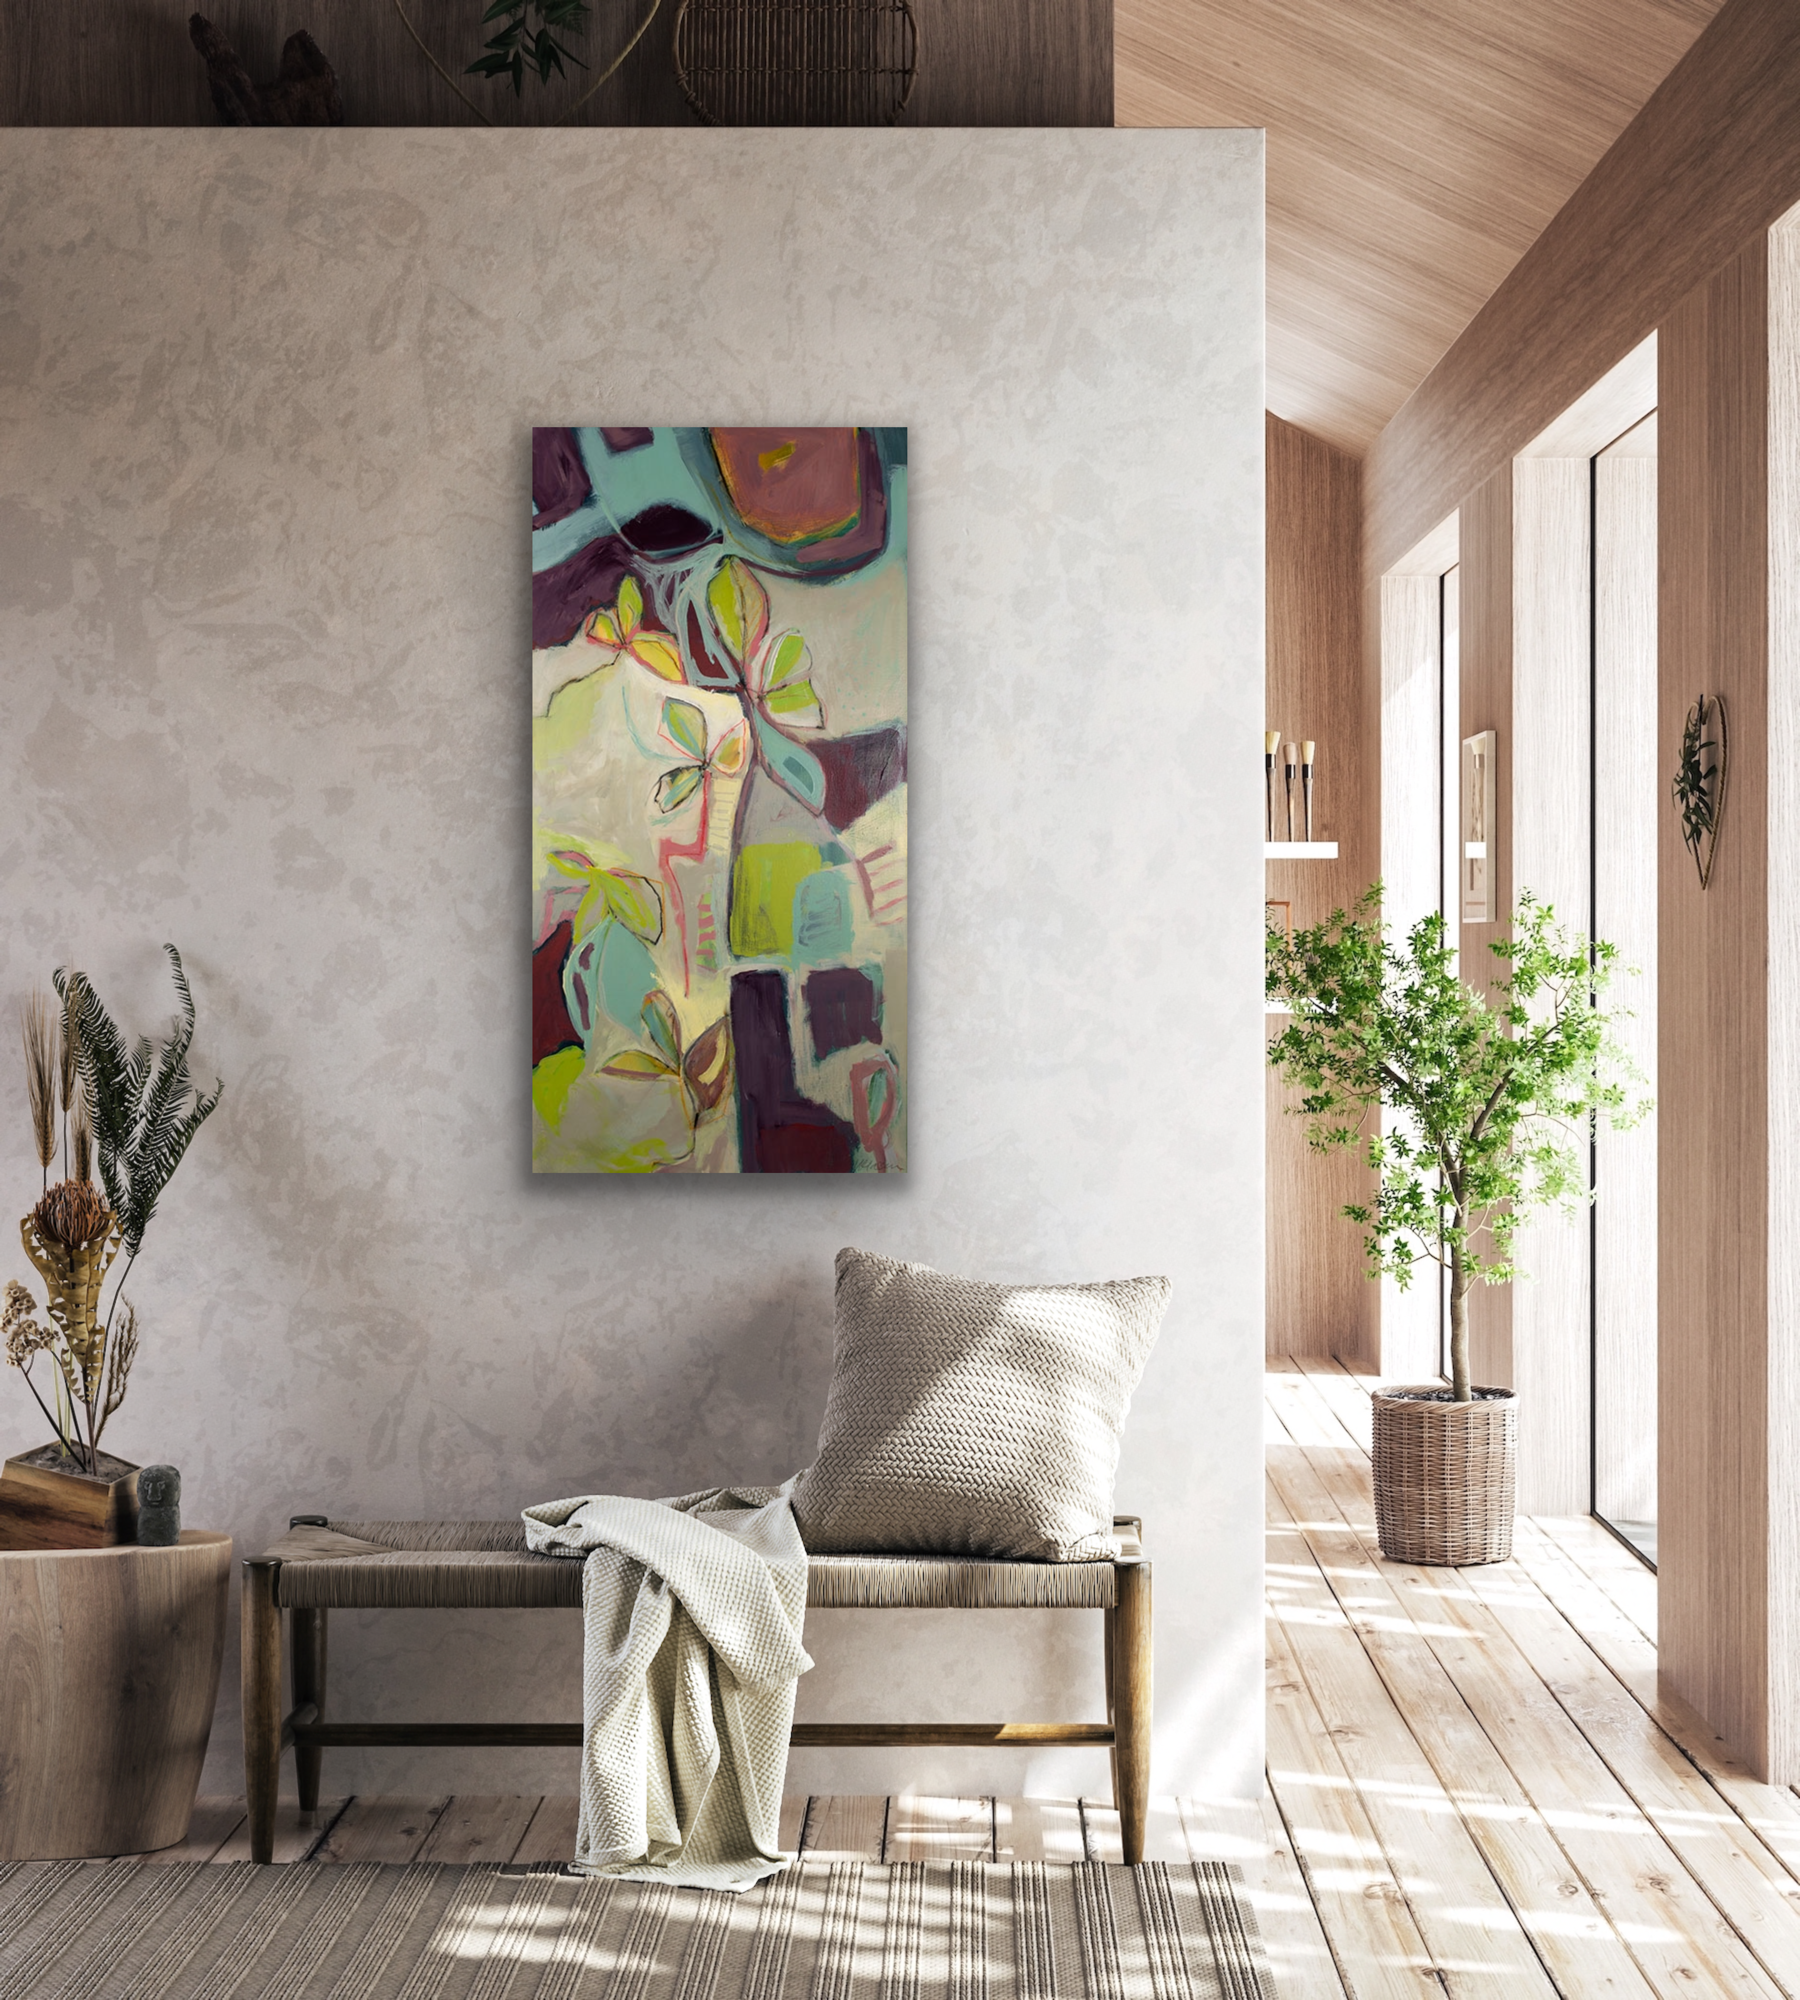 Unraveled Vines abstract art work comes in four different sizes to fit your wall perfectly.